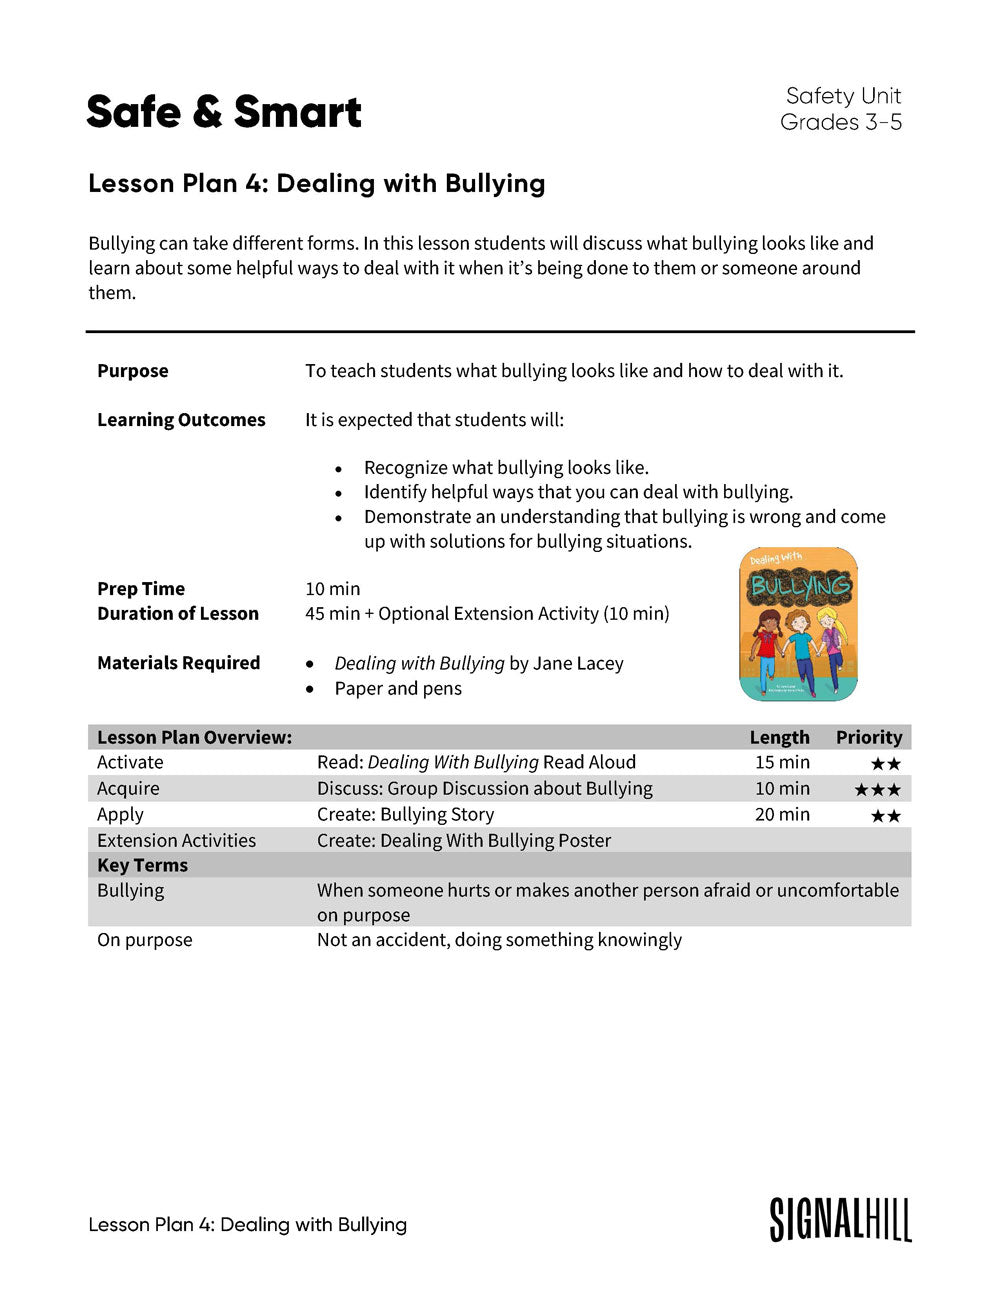 Lesson Plan 4: Dealing with Bullying